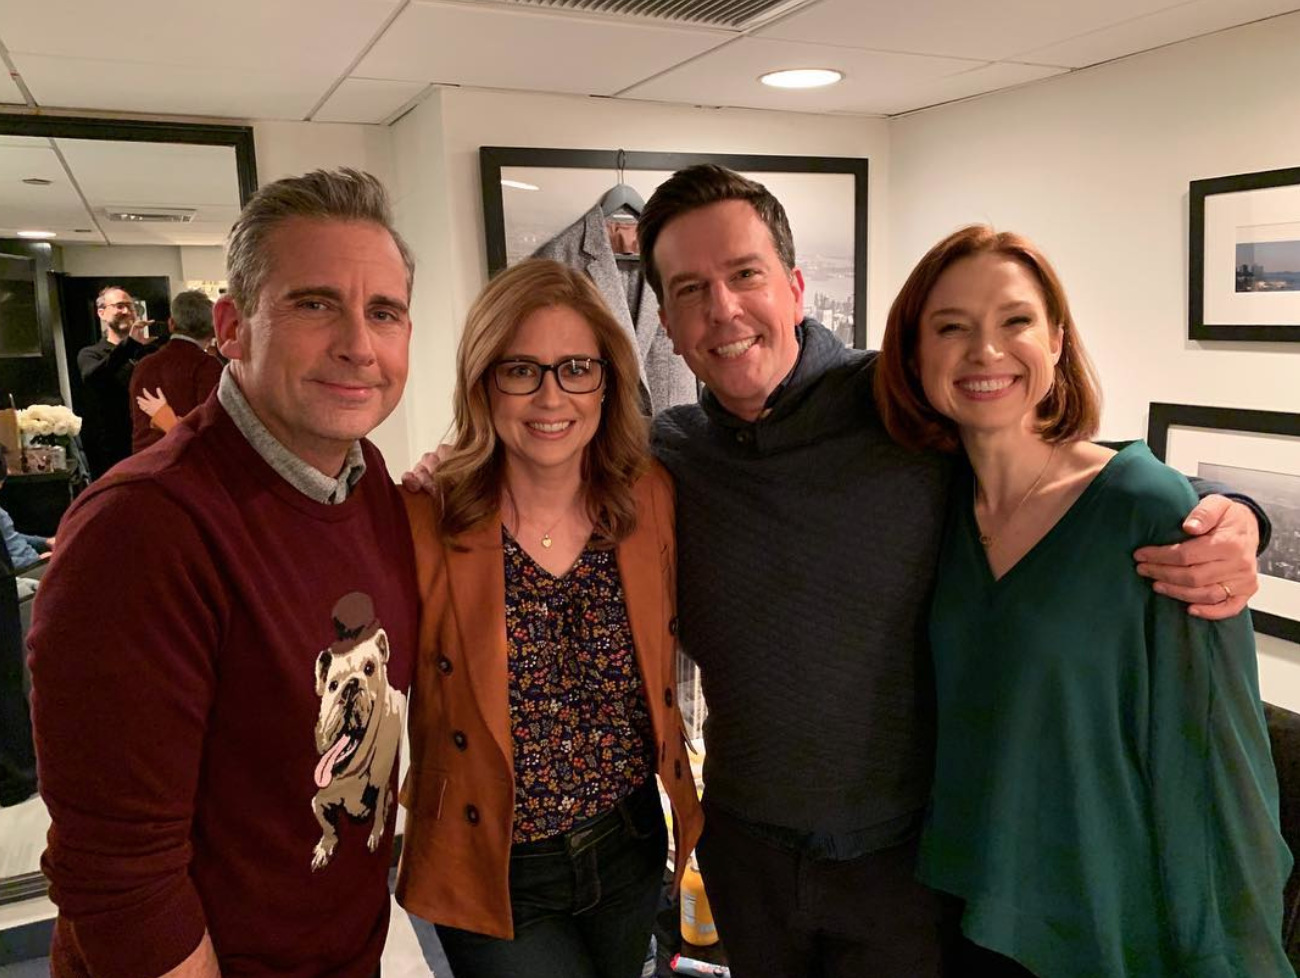 All the Times 'The Office' Cast Has Reunited Over the Years